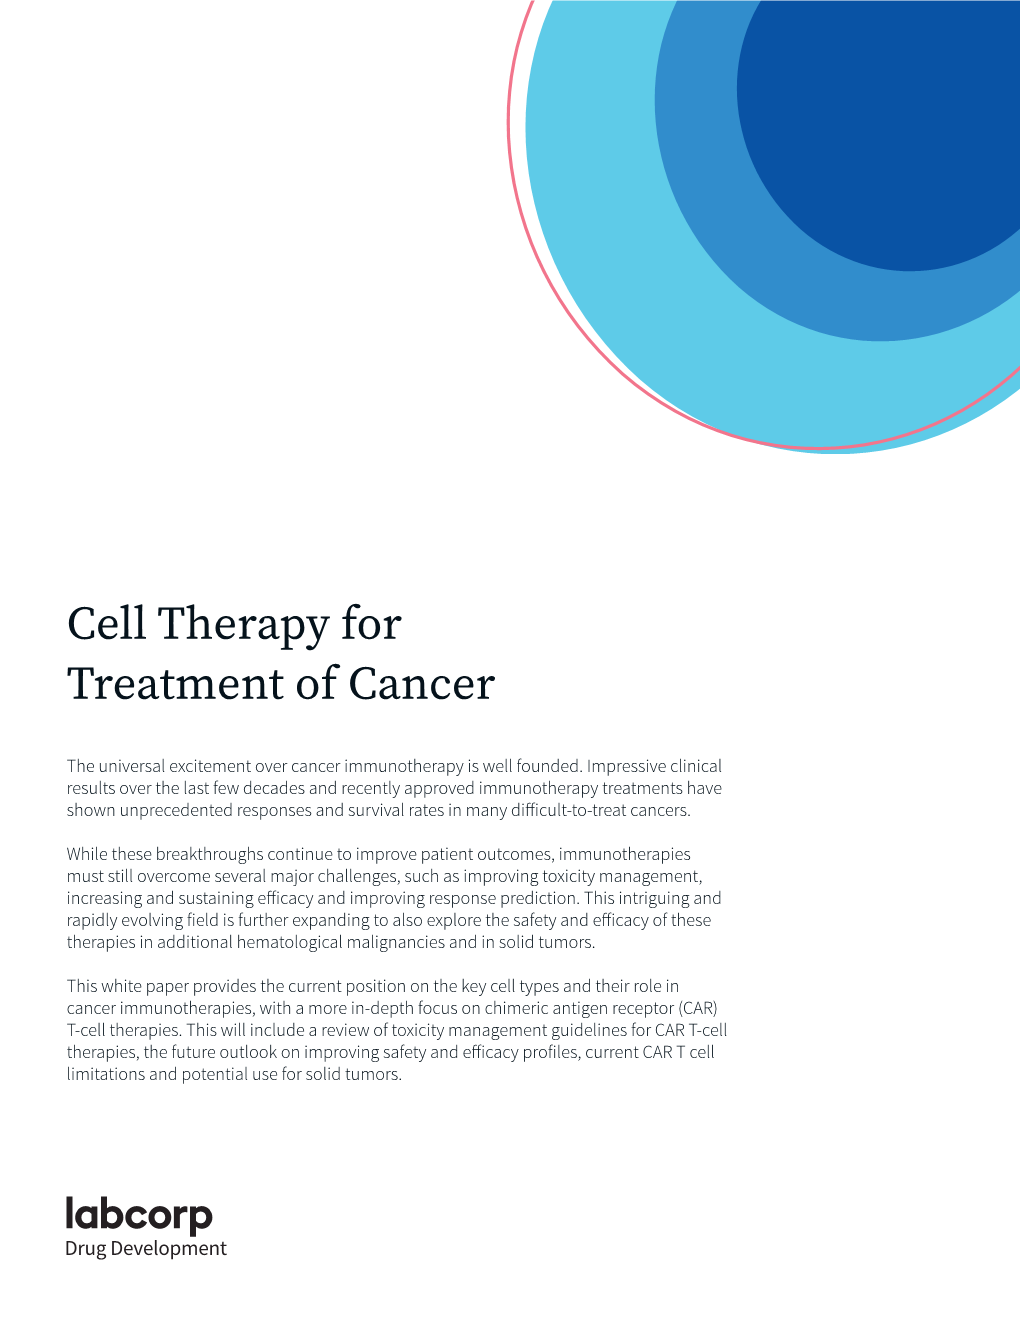 Cell Therapy for Treatment of Cancer